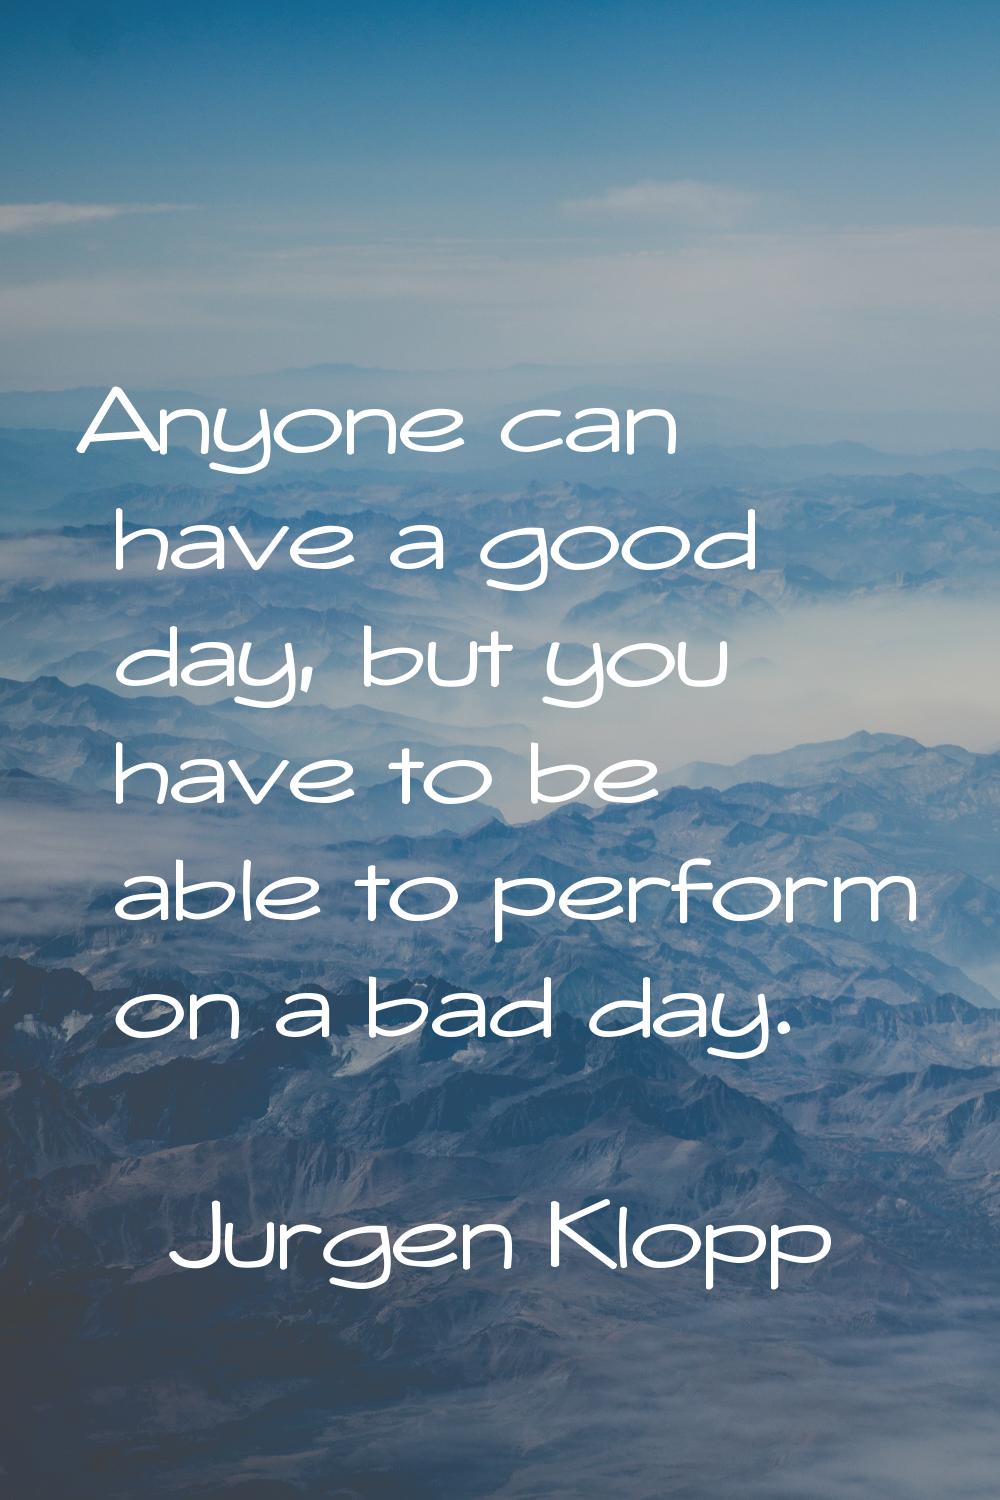 Anyone can have a good day, but you have to be able to perform on a bad day.